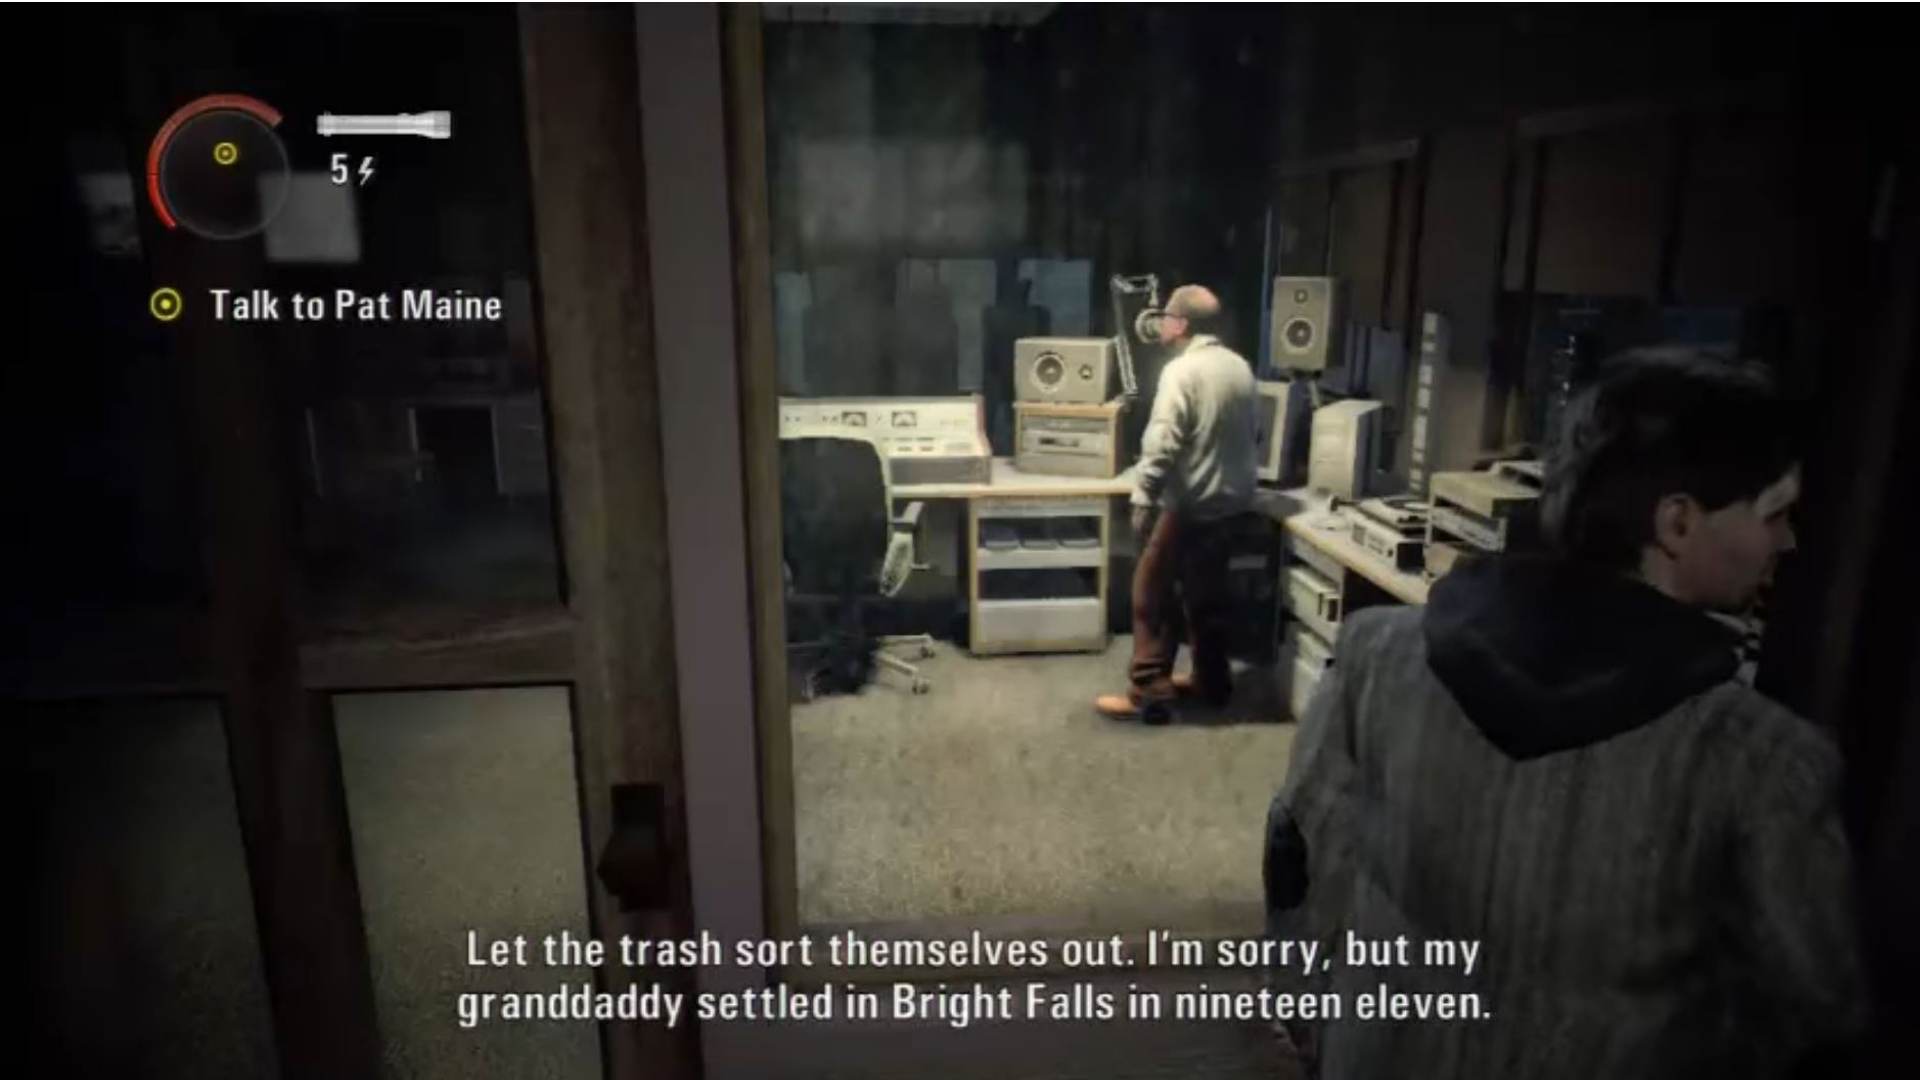 Alan Wake Remastered radios: Alan is looking through the window and listening to the radio broadcast.